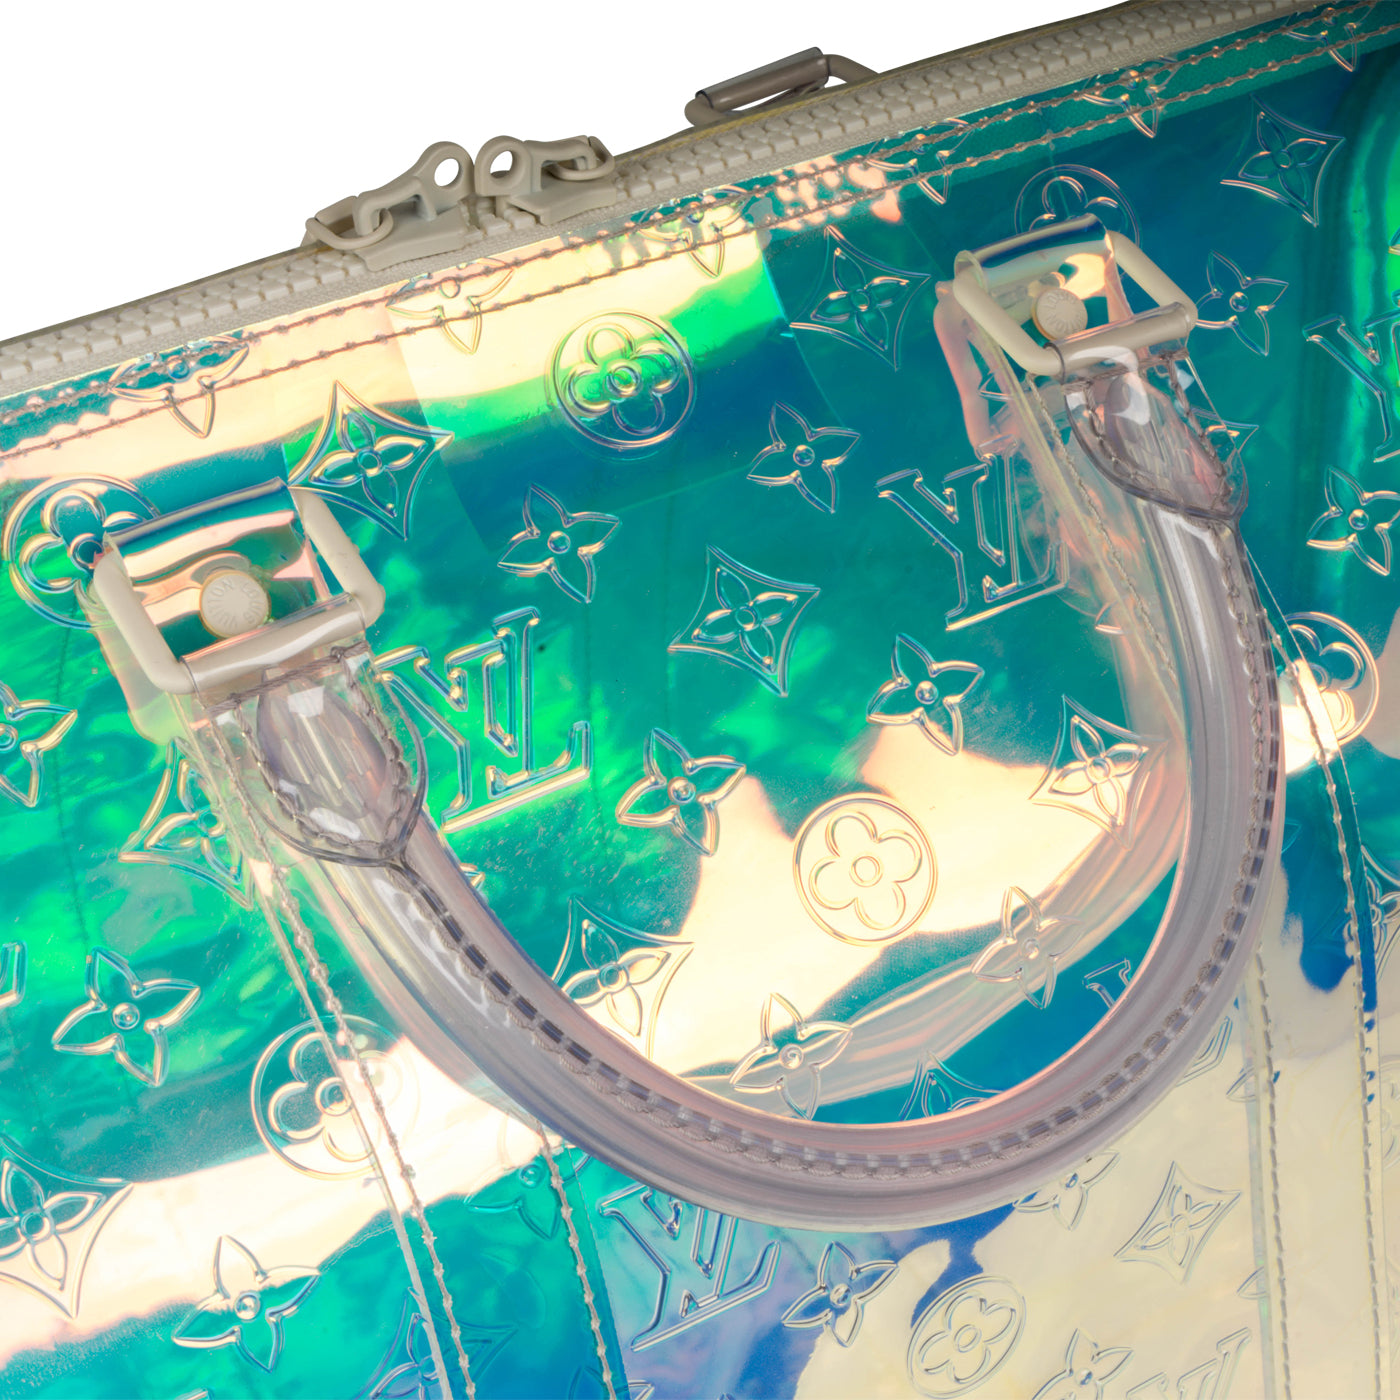 virgilabloh's iridescent @louisvuitton keepall bag could be